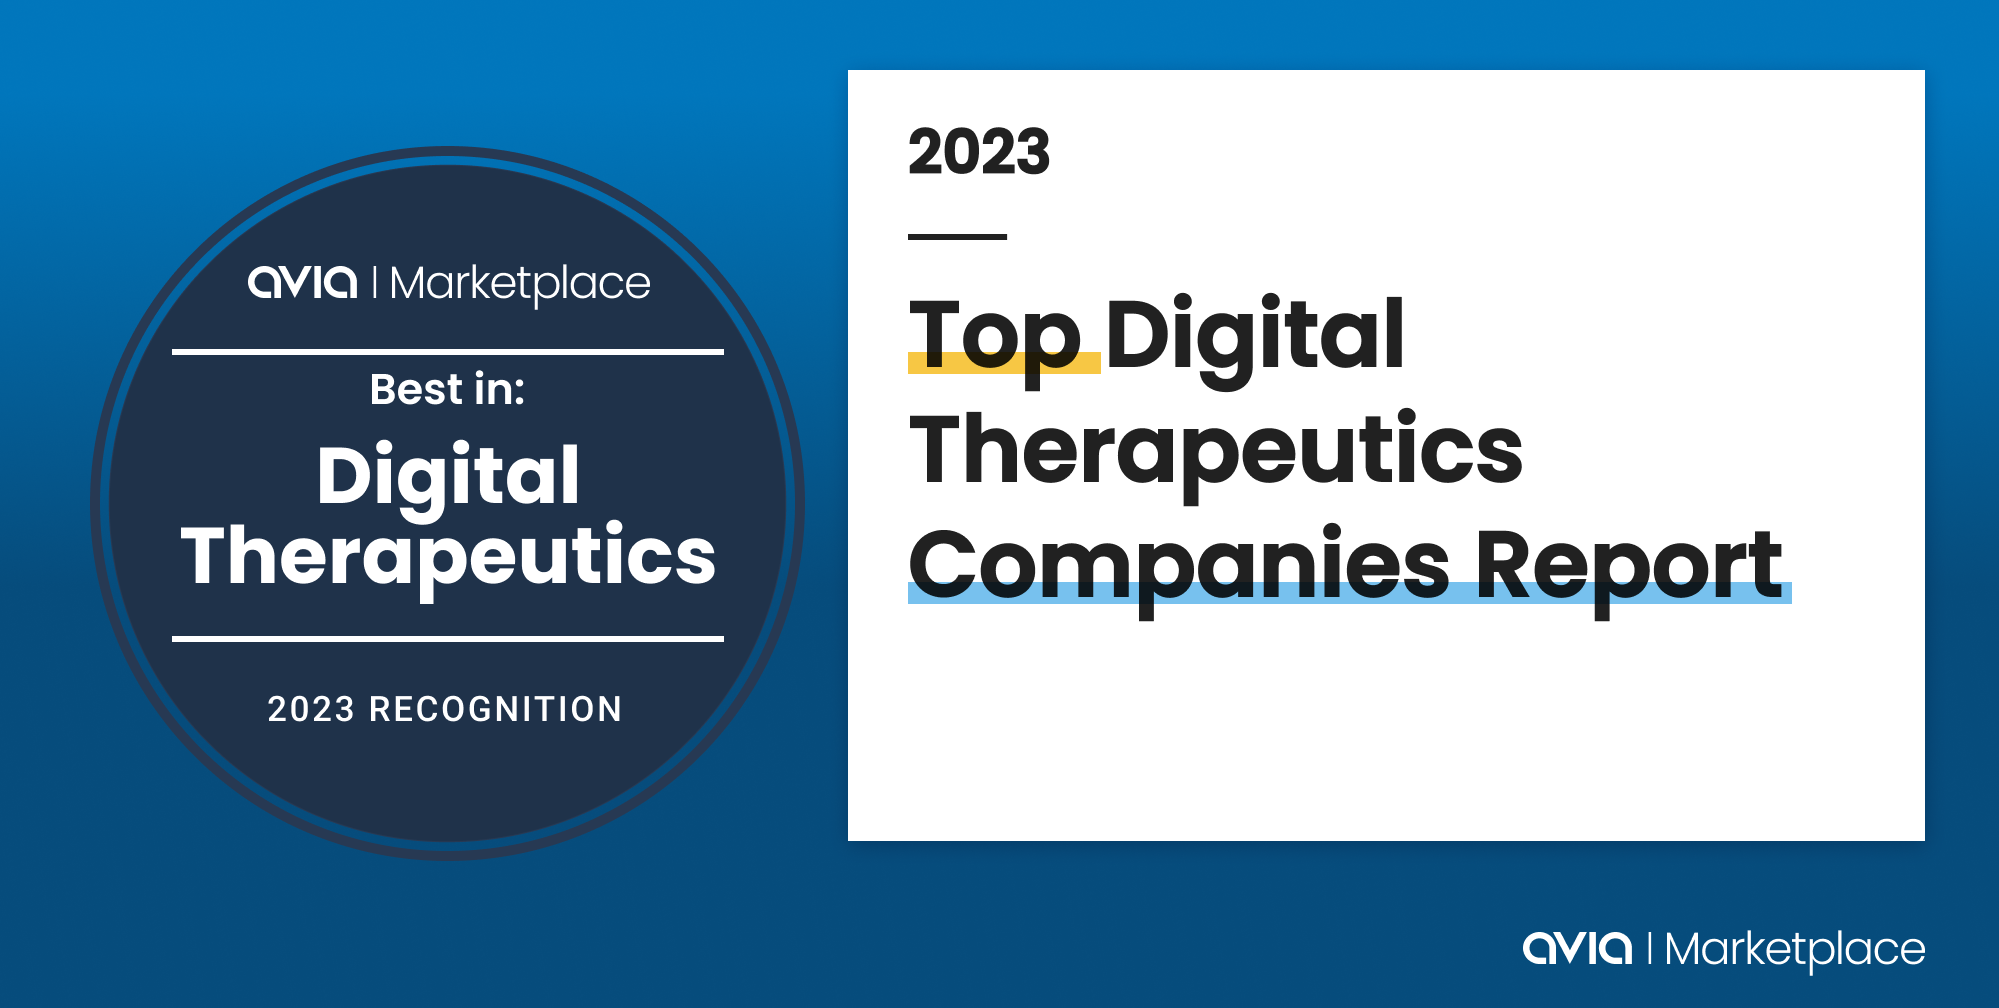 Xealth Named to AVIA Marketplace’s Top Digital Therapeutics Companies